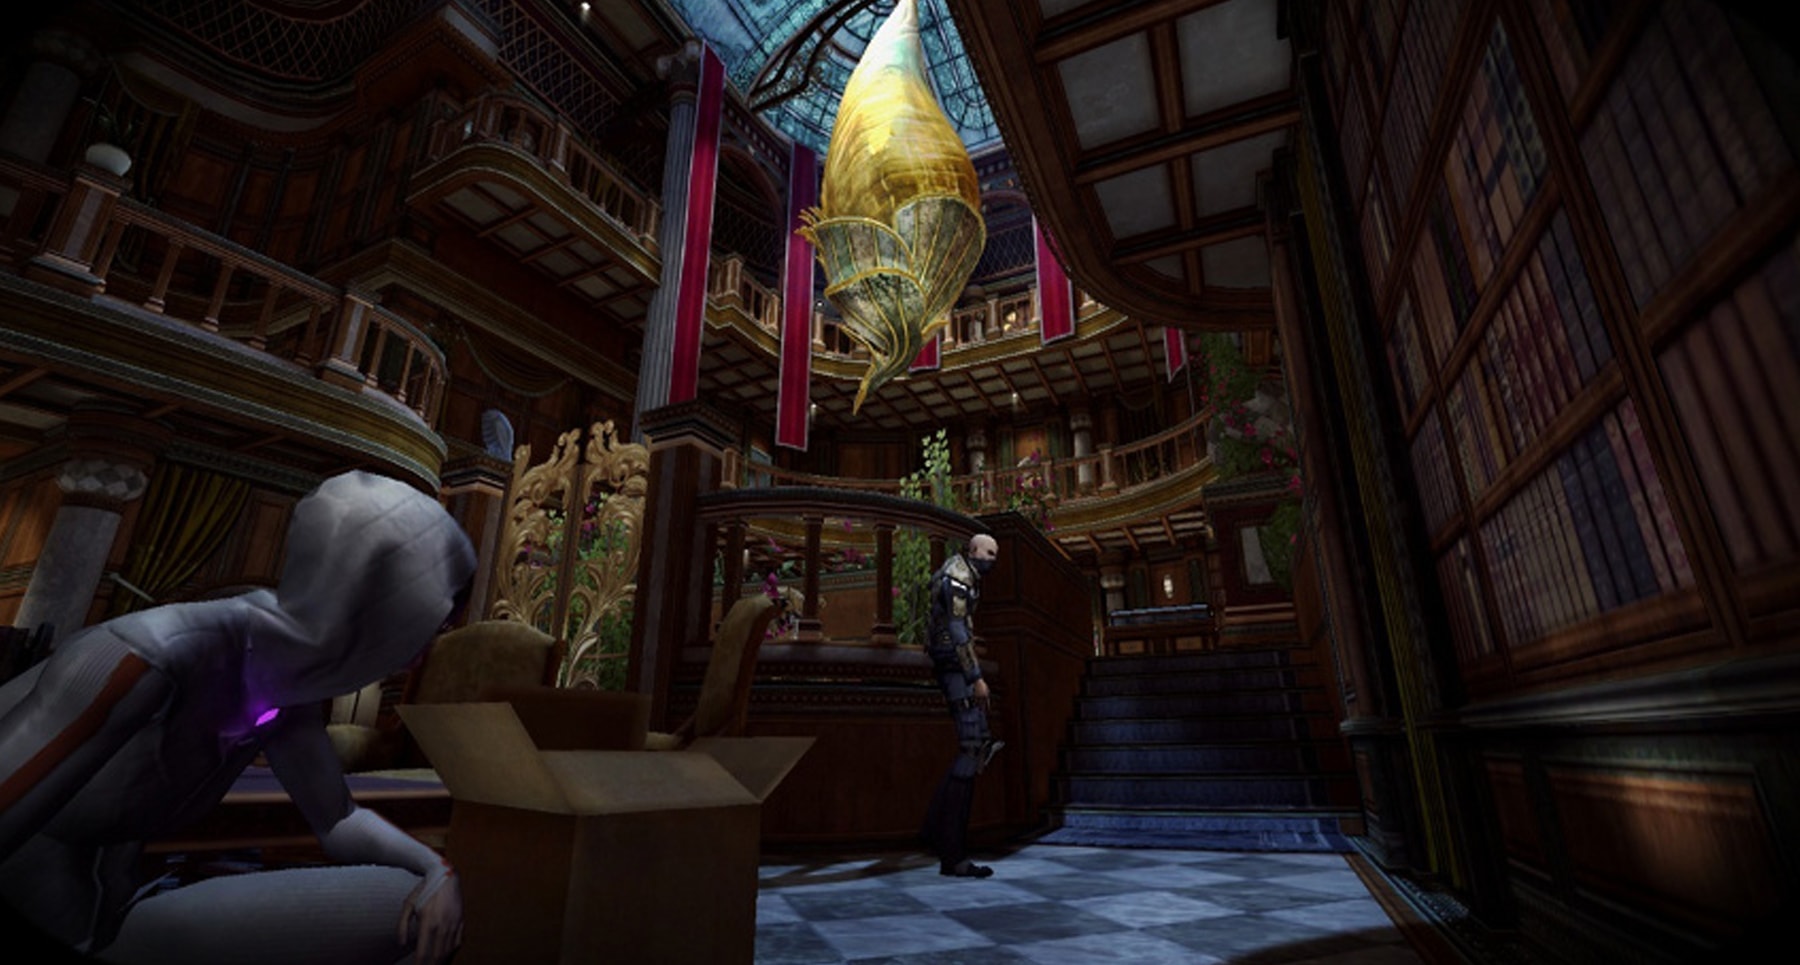 Screenshot from Republique of main character hope crouching behind boxes in a darkened chamber